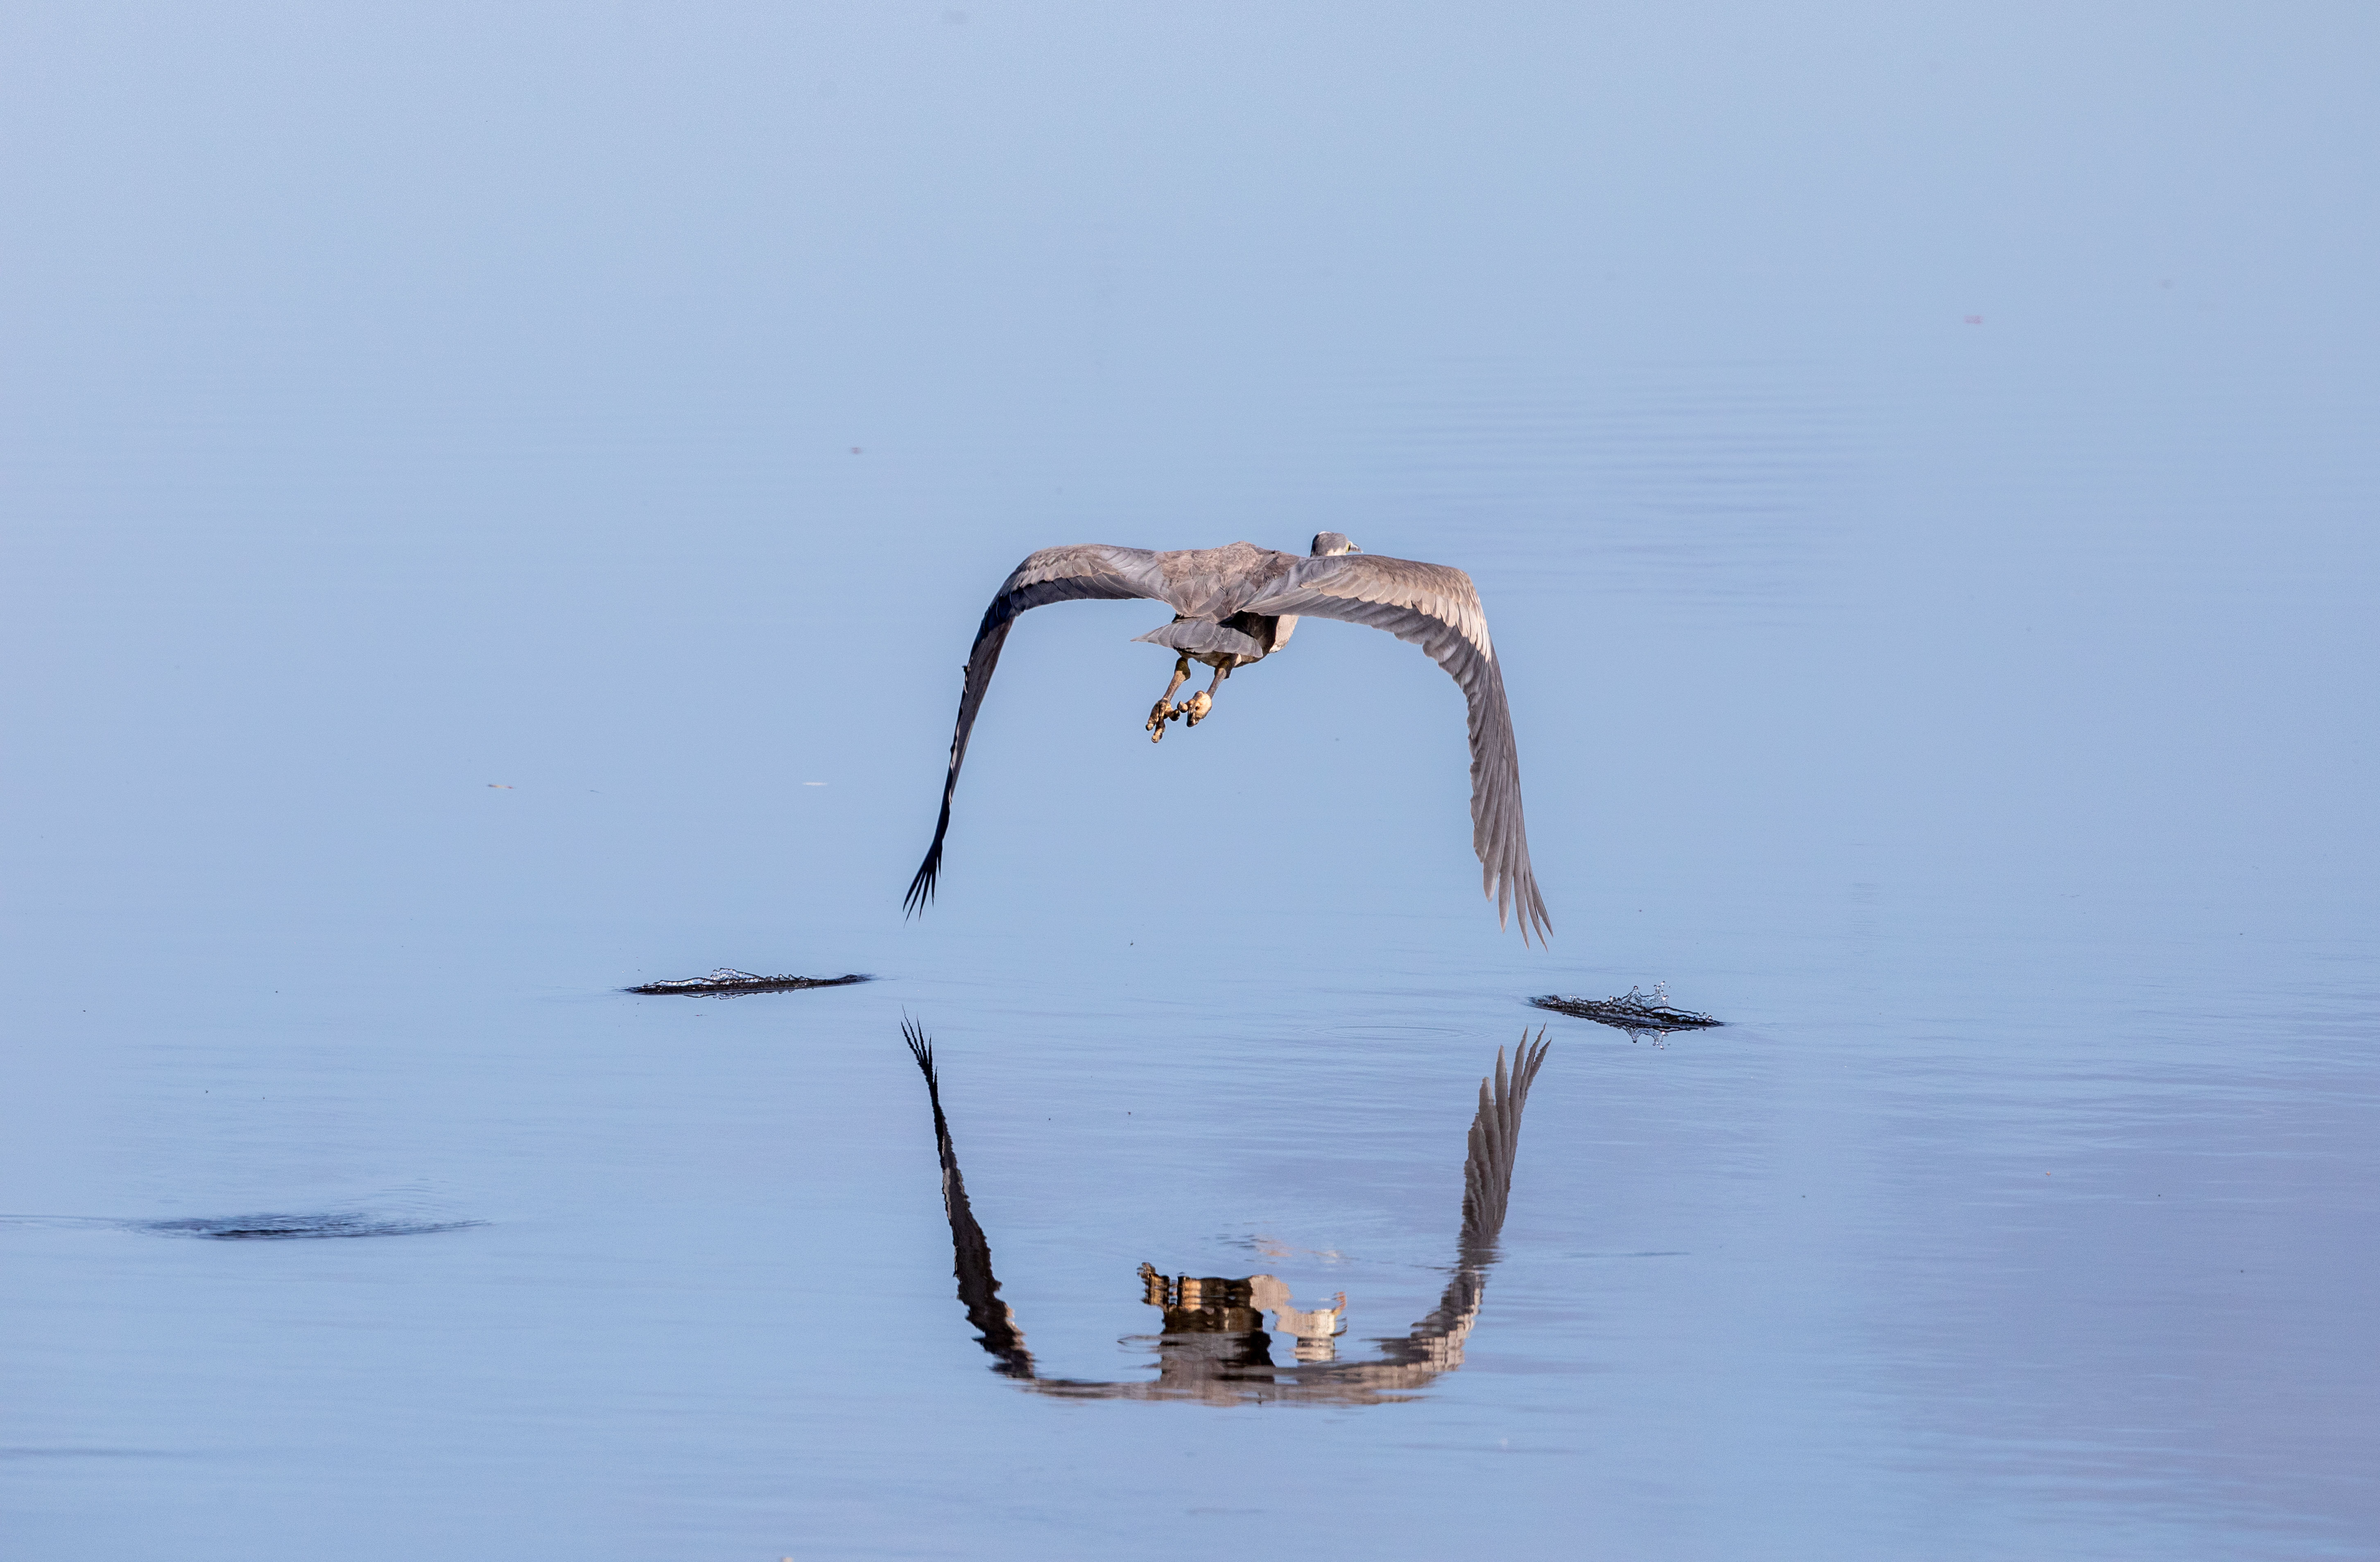 A large gray bird flaps its wings just above a body of water, disrupting the water's surface. There is a reflection of the bird in the water.